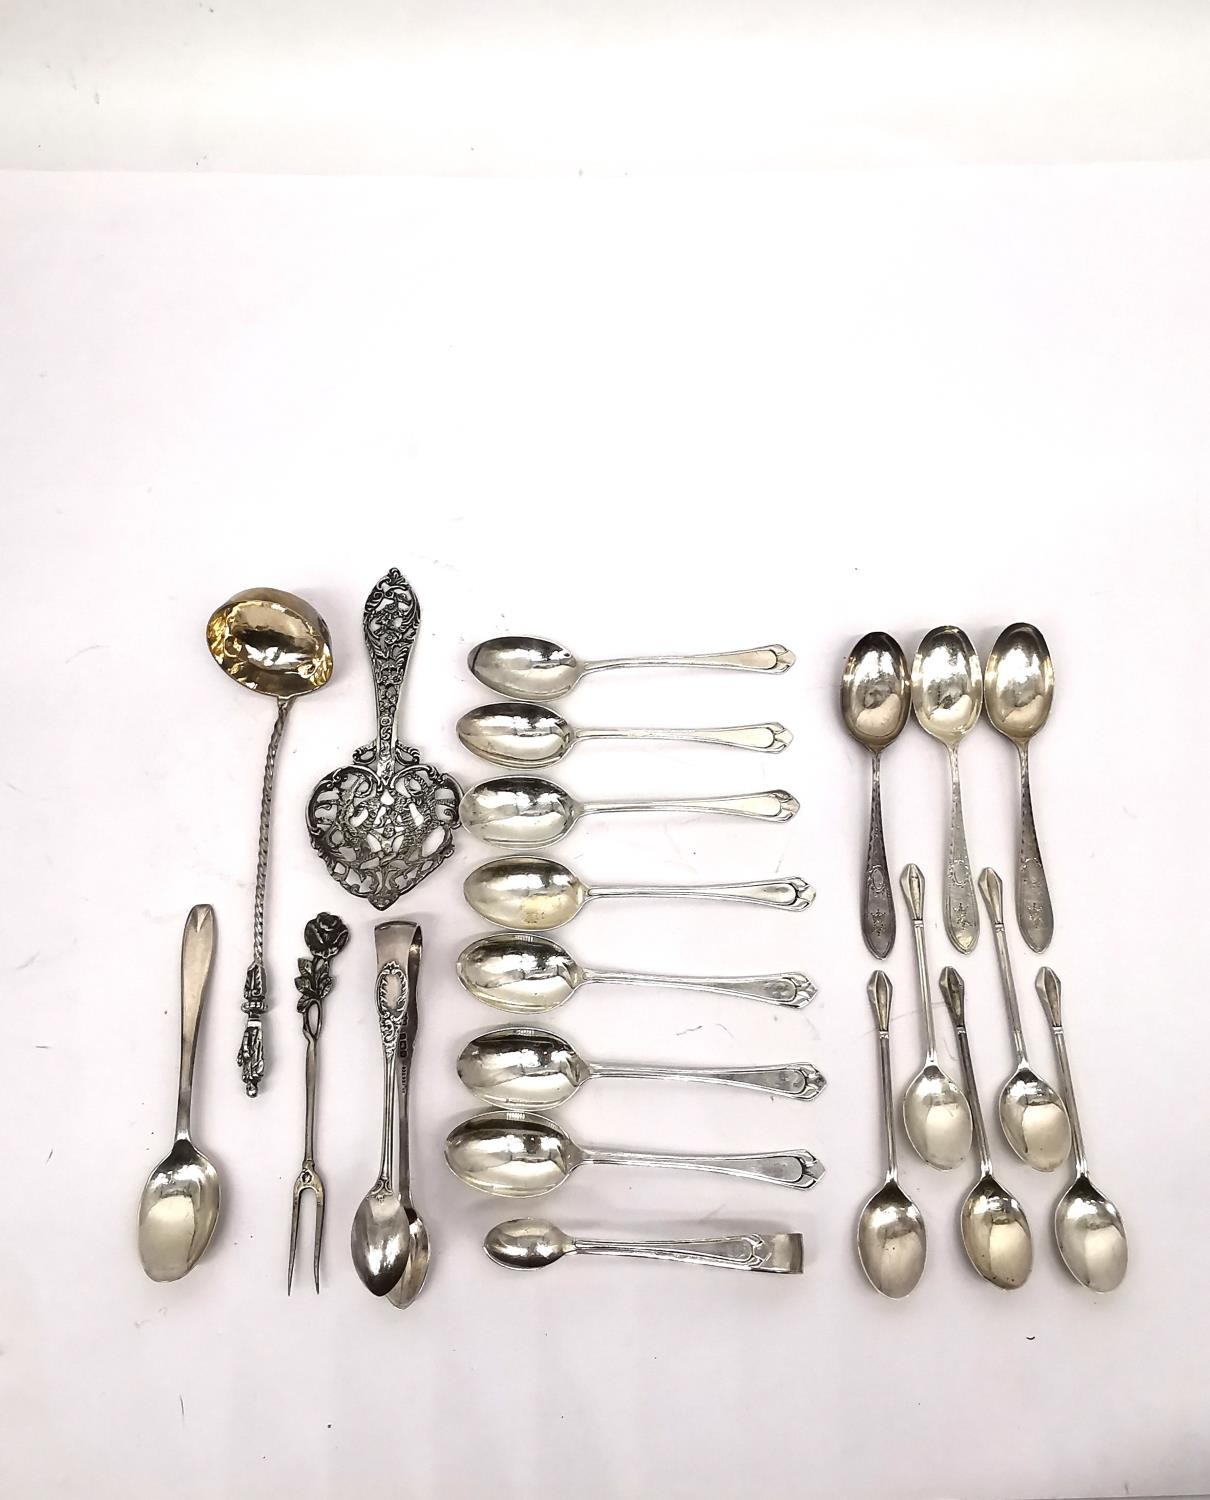 A collection of silver teaspoons, two pairs of sugar tongs, a pickle fork, a small sauce ladle and a